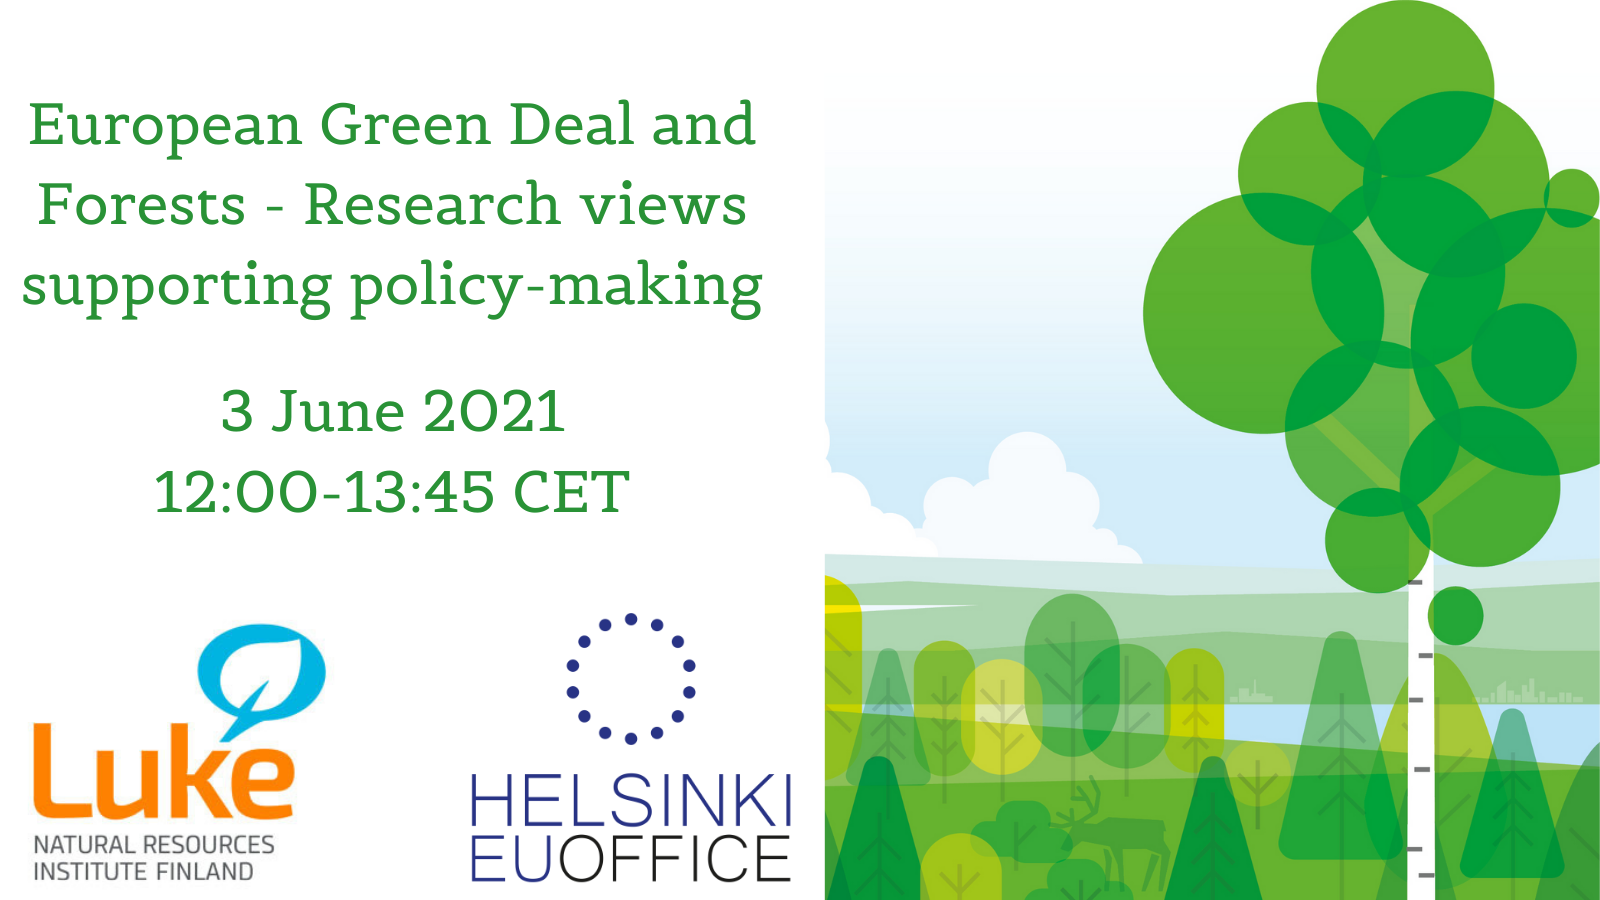 European Green Deal and Forests – Research views supporting policy-making, forest on the background and a larger single tree in the front on the right-hand side